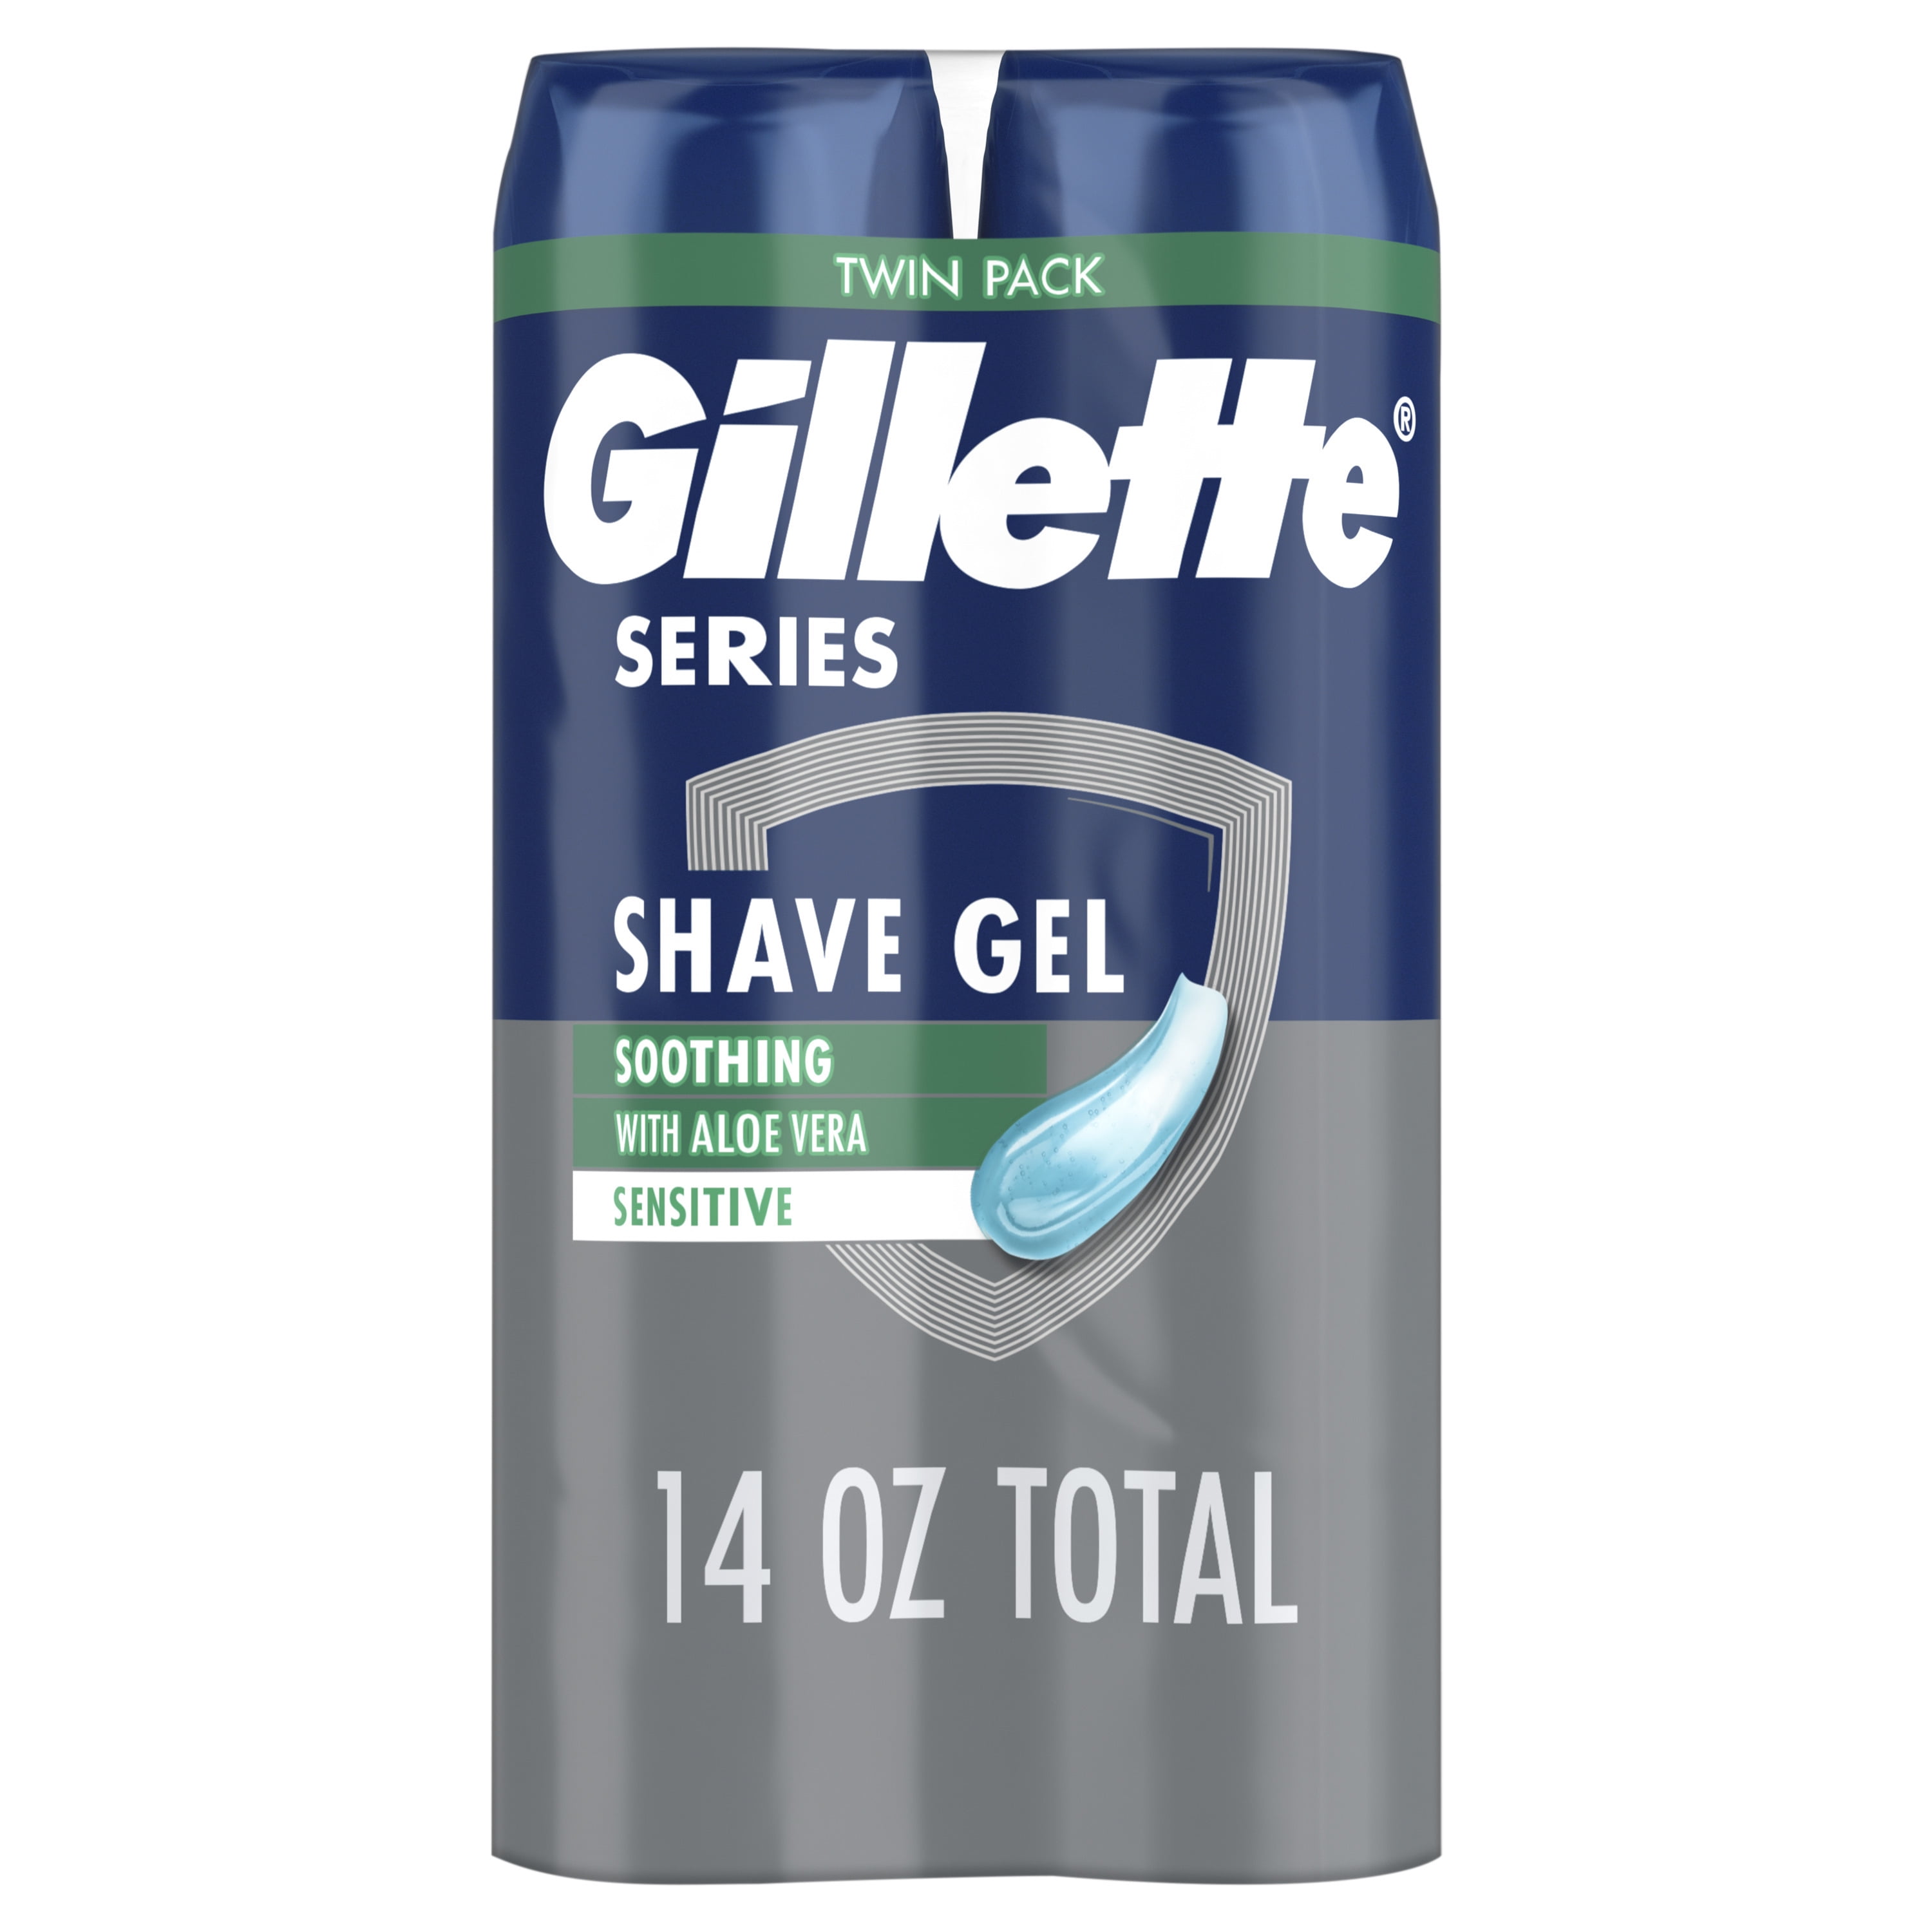 Gillette Men's Shave Gel with Aloe Vera Twin Pack